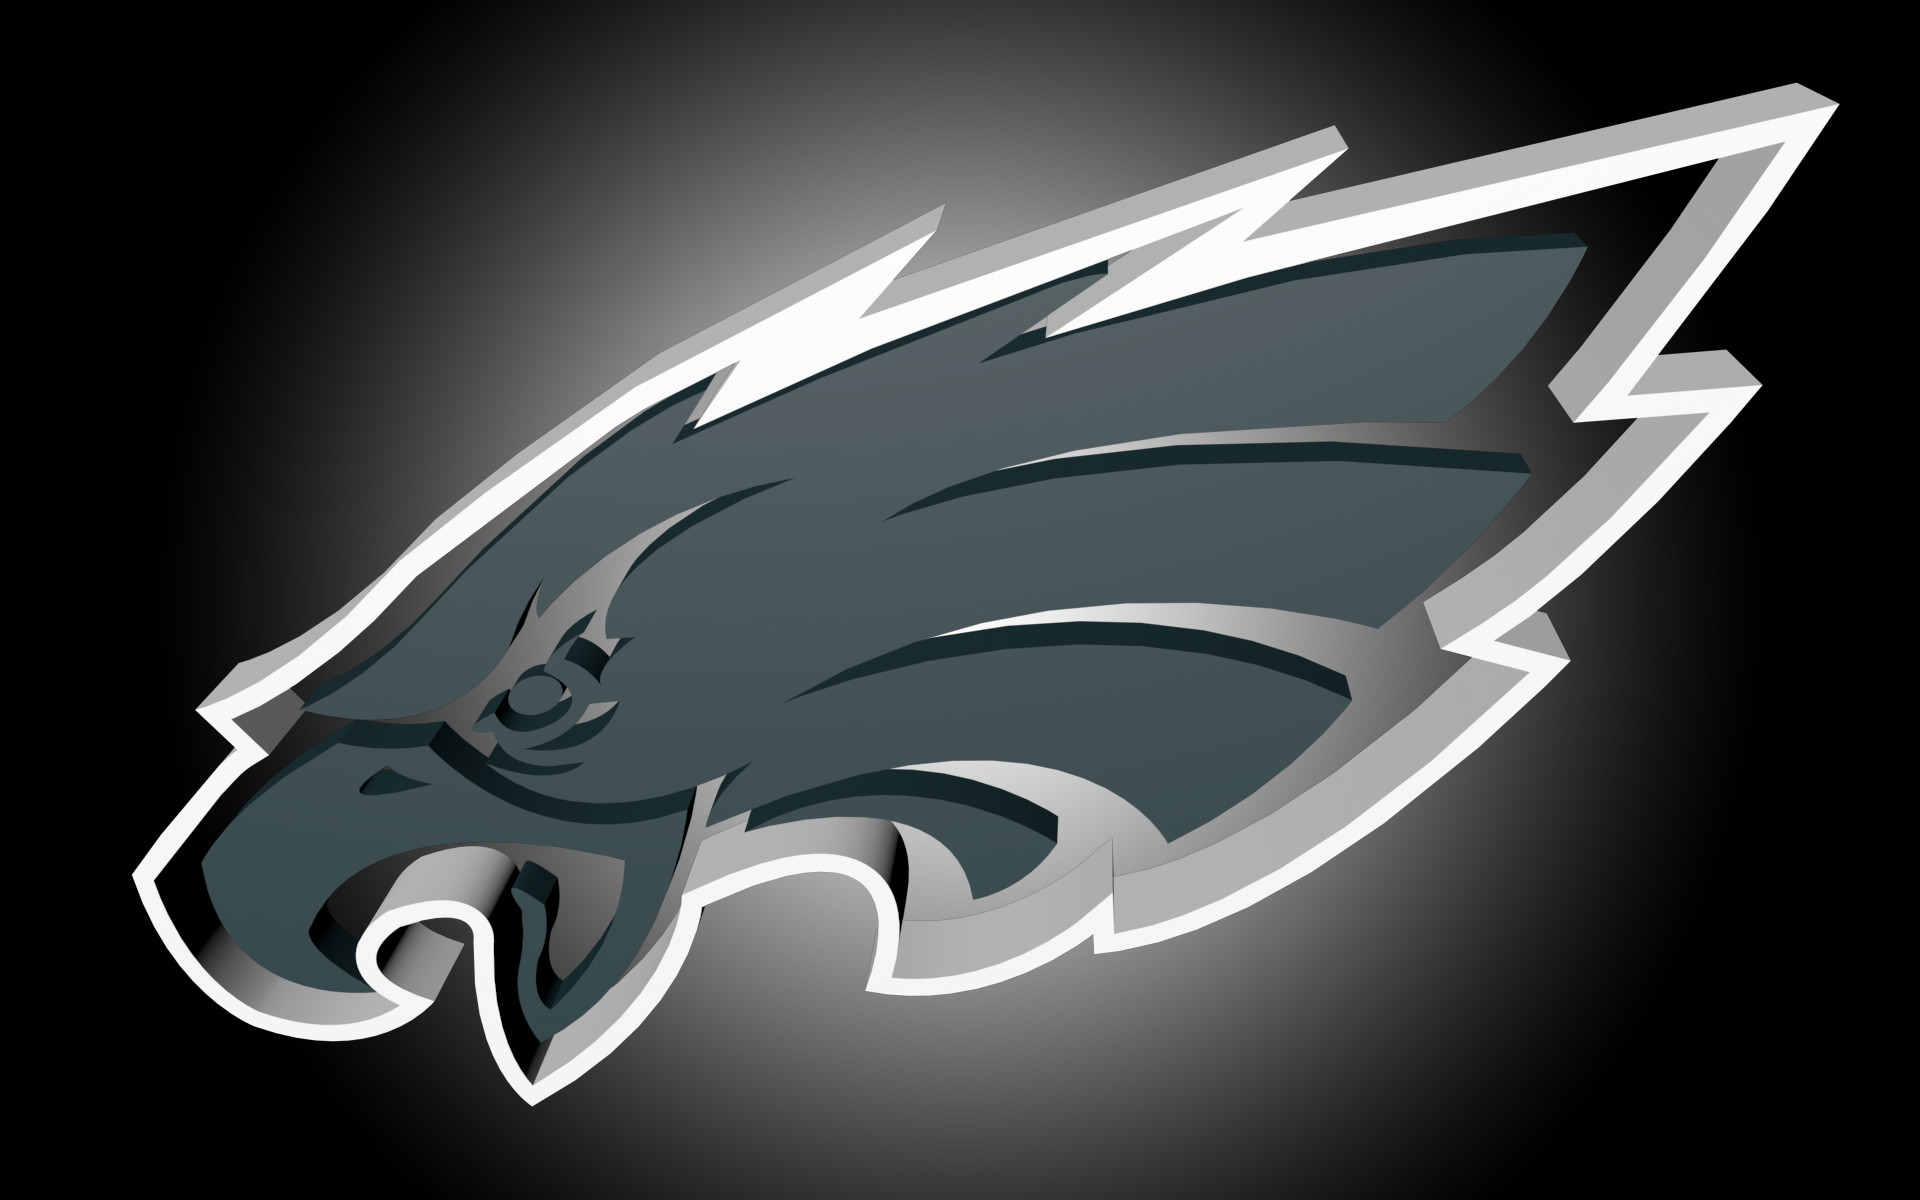 1920x1200 Free Amazing Eagles Football Images on your Ipad